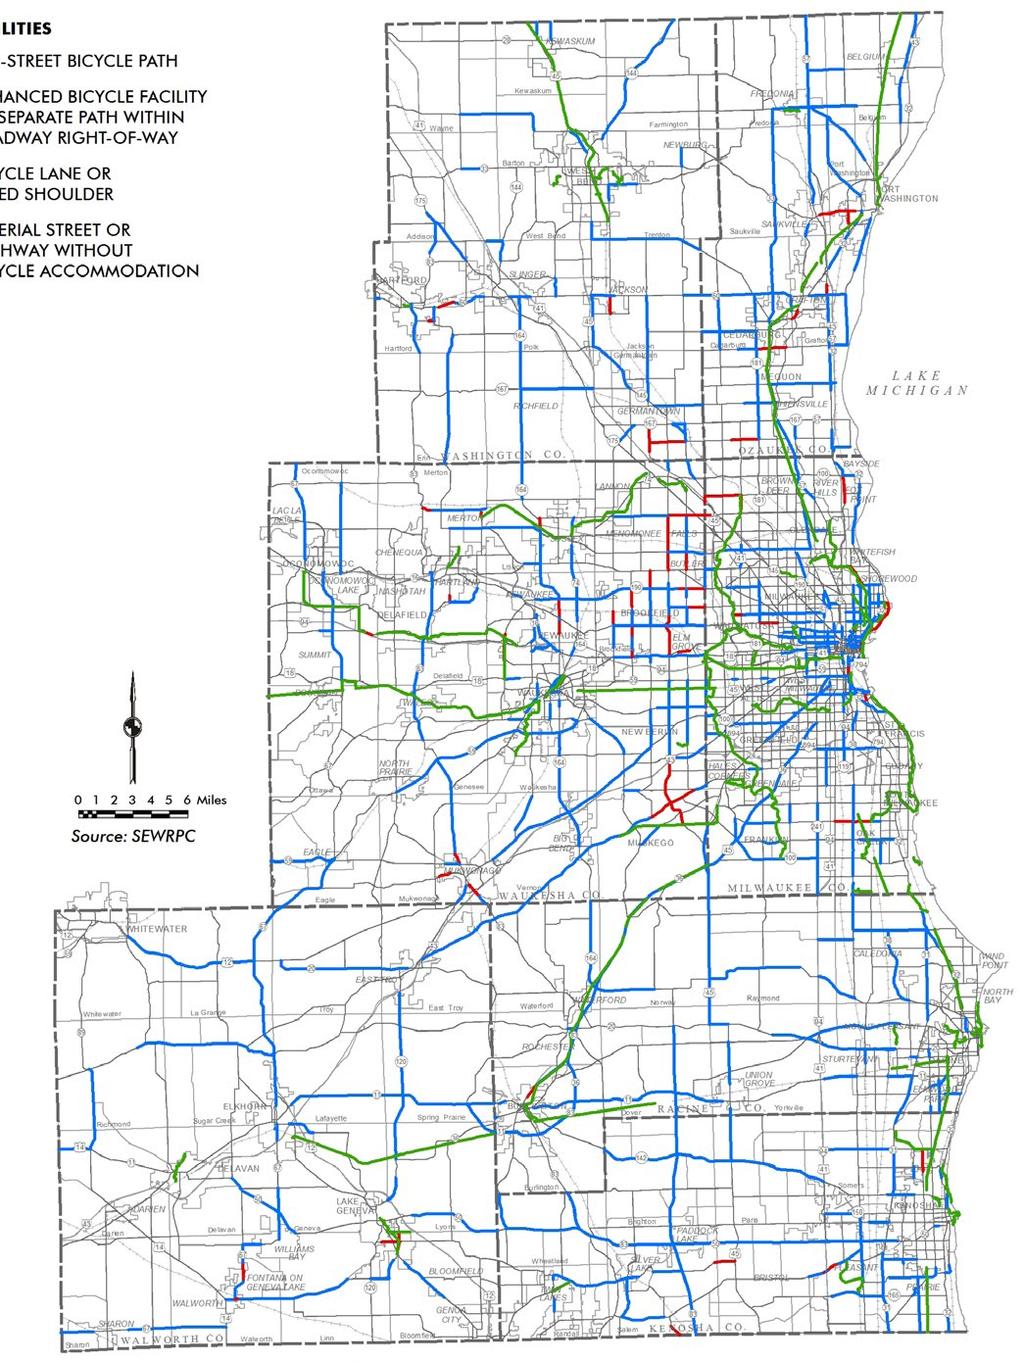 Map 6 BICYCLE NETWORK: TREND Map 5 BICYCLE NETWORK: EXISTING BICYCLE & PEDESTRIAN BICYCLE FACILITIES OFF-STREET BICYCLE PATH Map 7 BICYCLE NETWORK: ALTERNATIVE PLANS I AND II ENHANCED BICYCLE